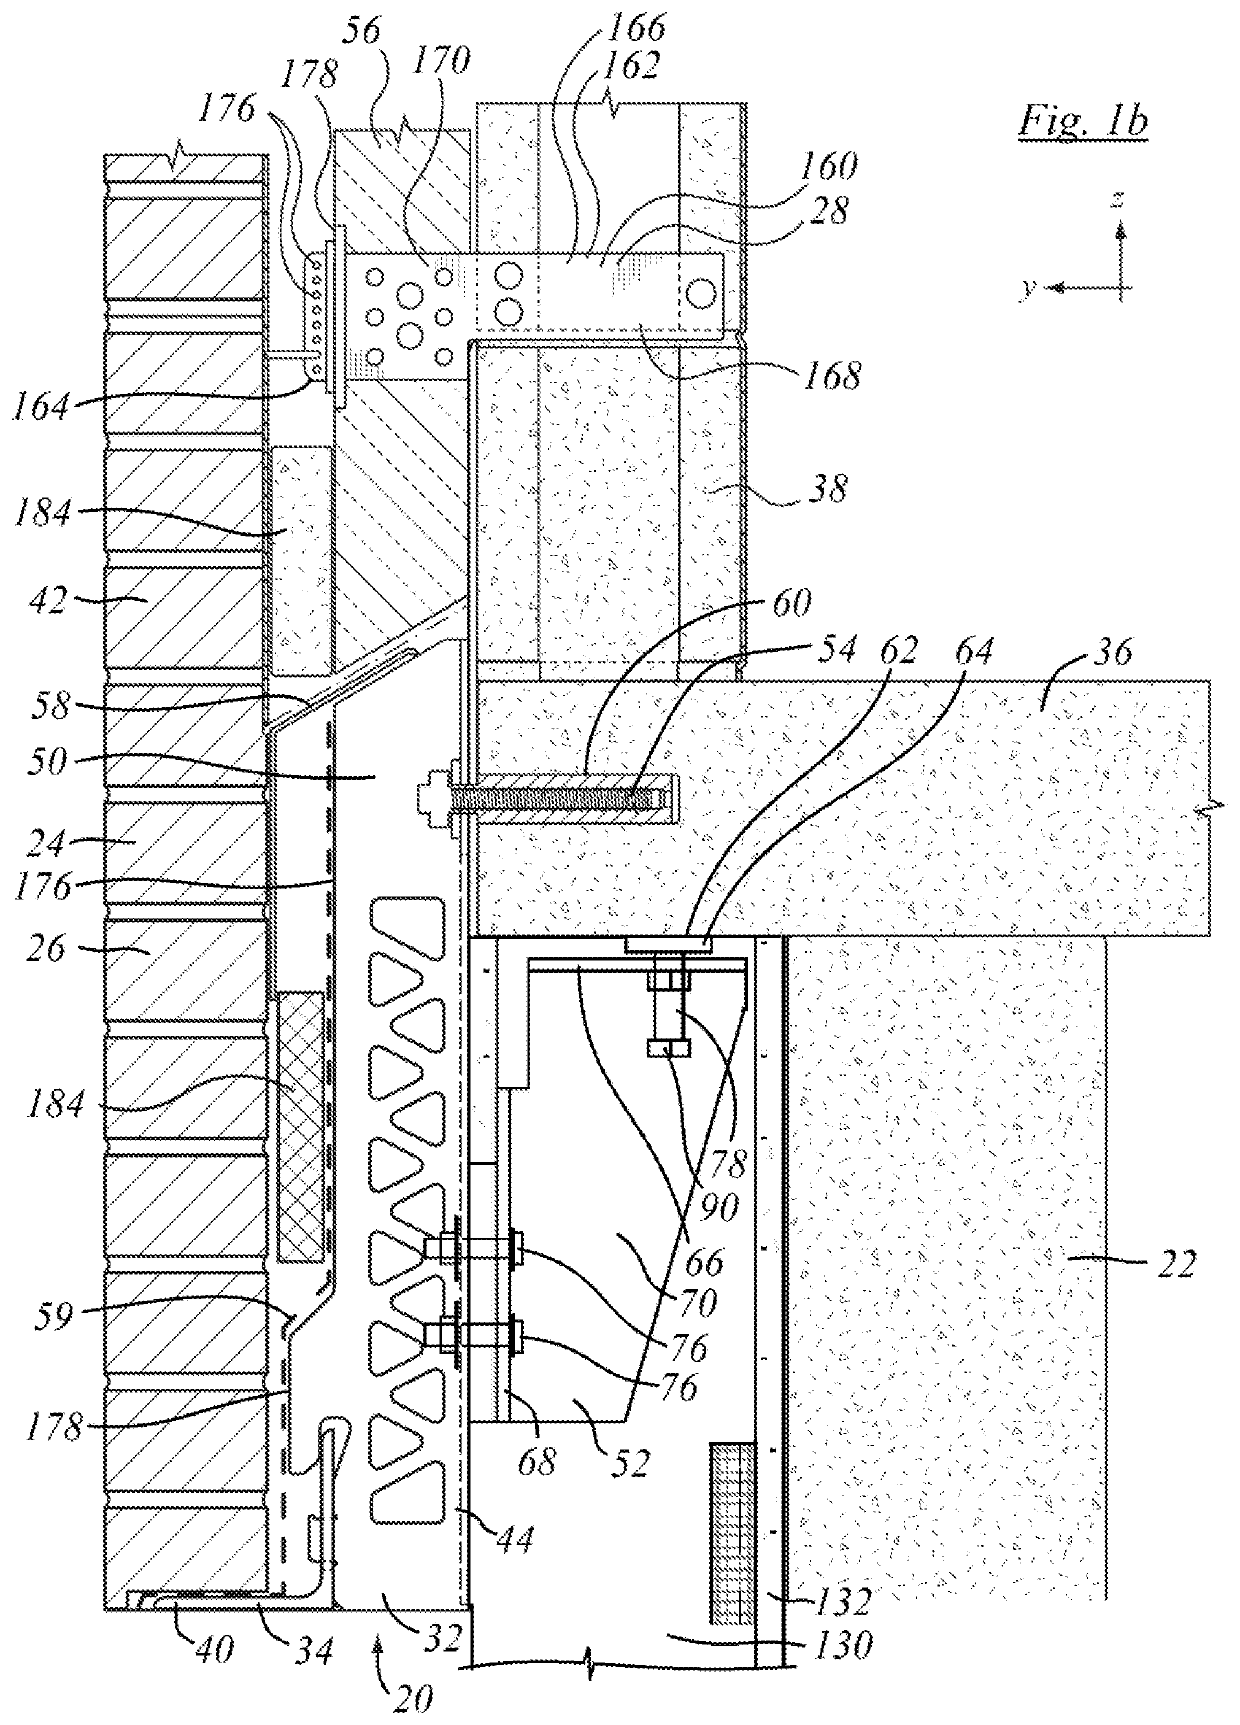 Support bracket assembly and method